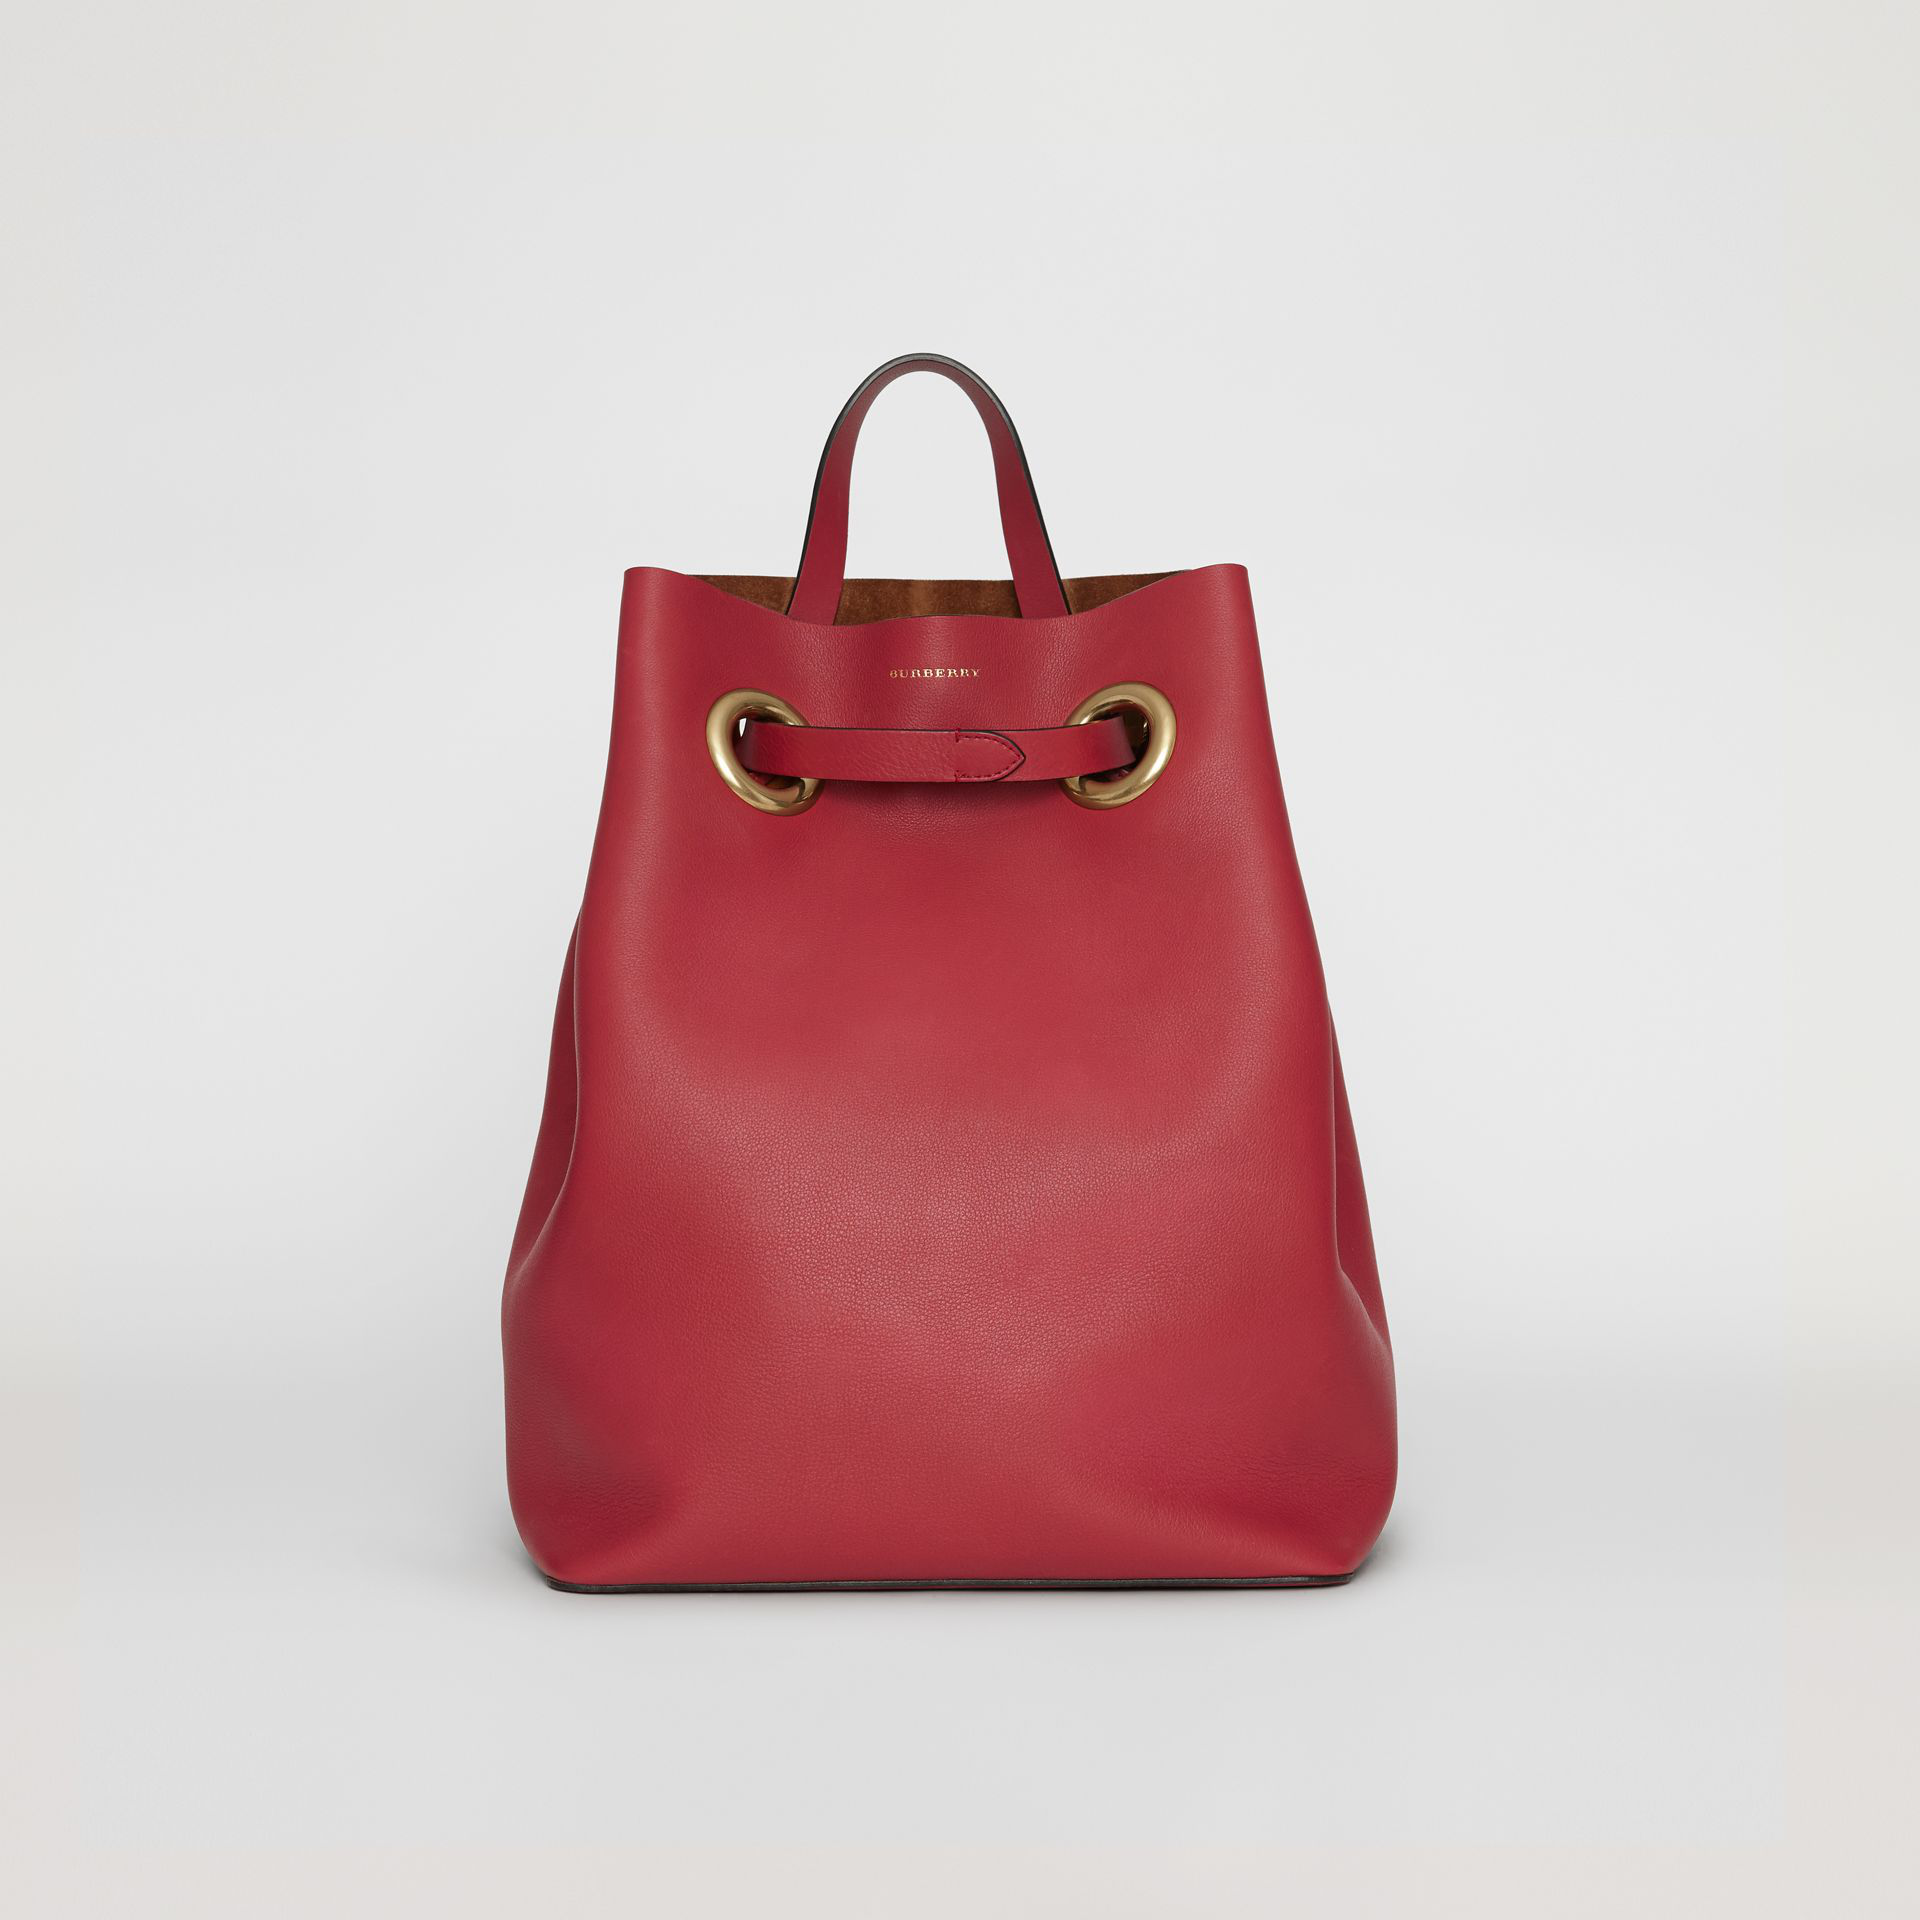 burberry the leather grommet detail backpack